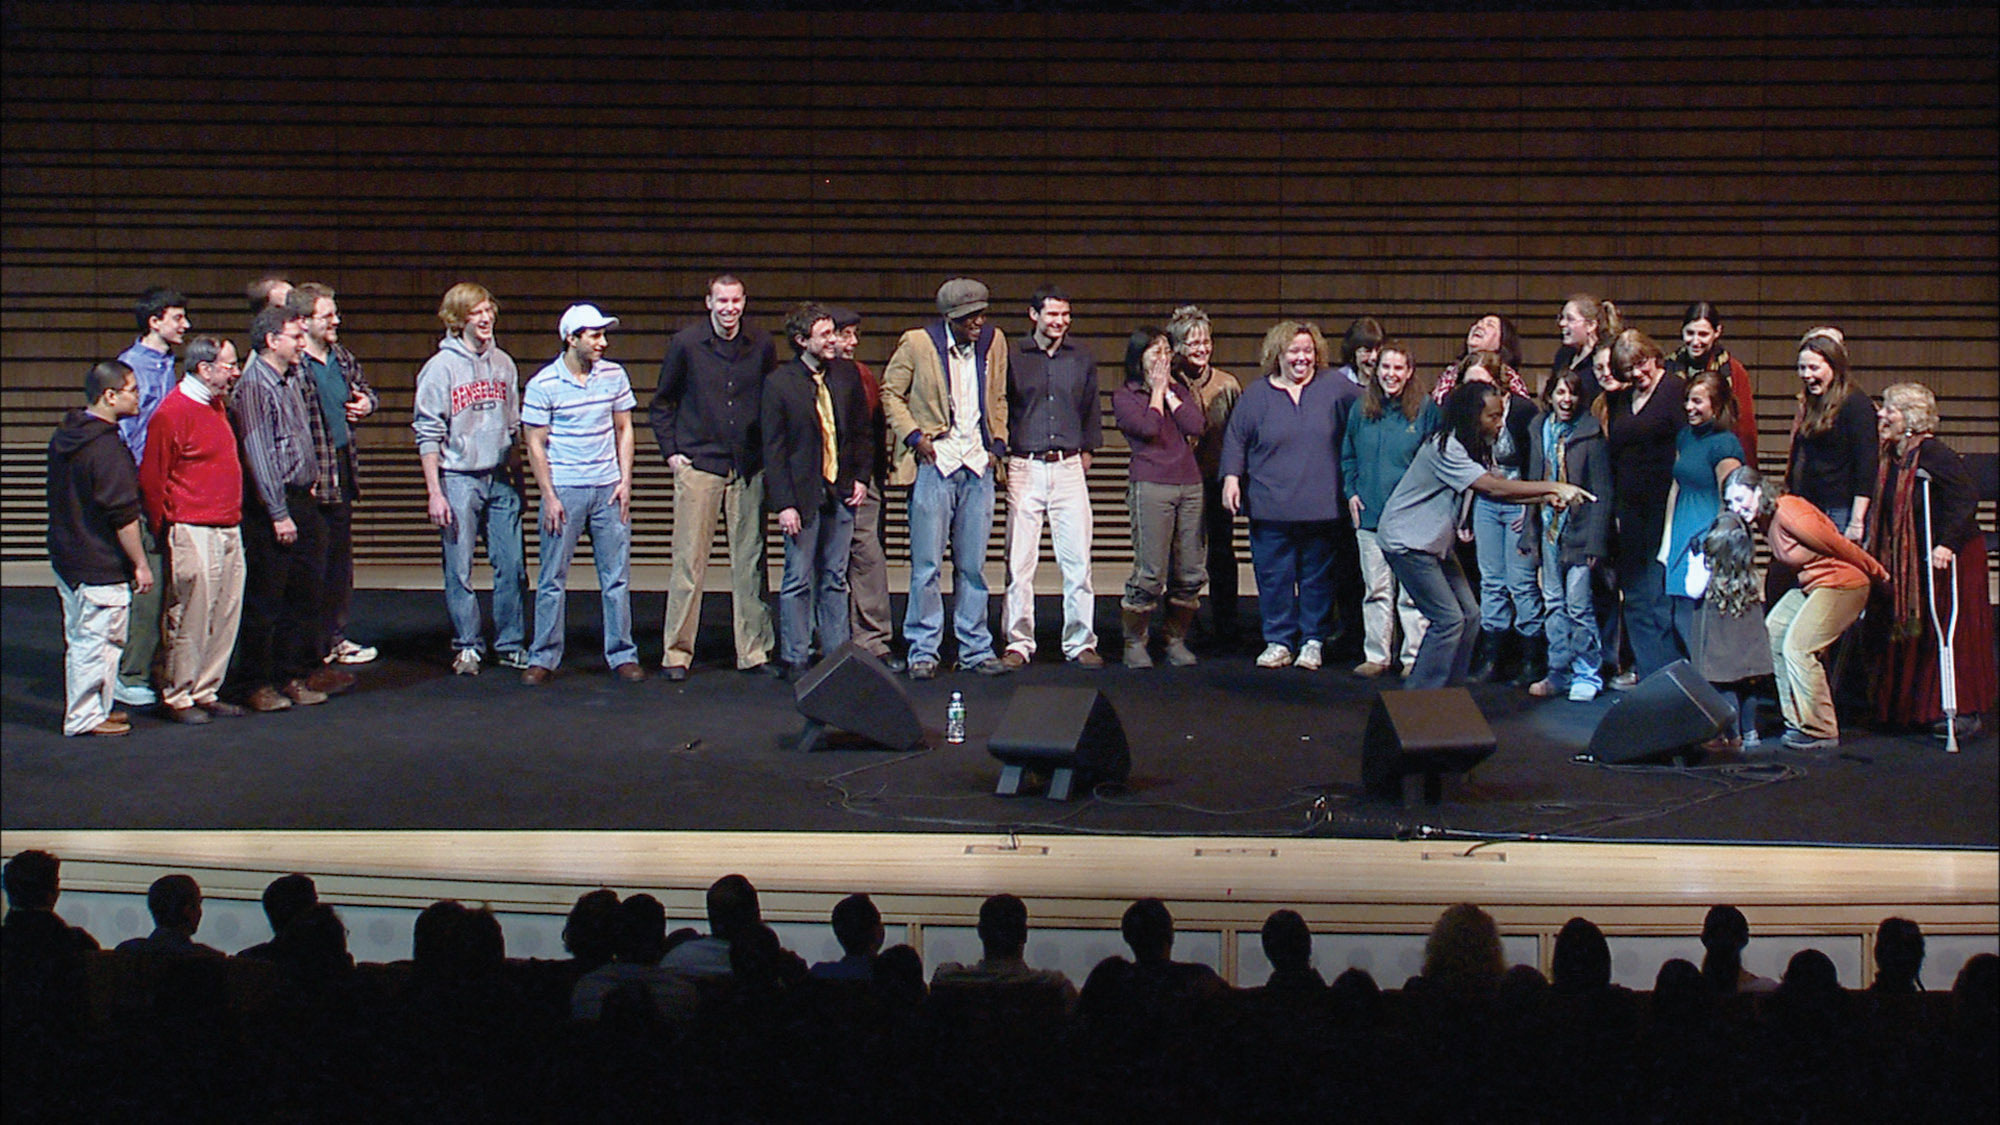 An assorted group of about 30 people standing on the concert hall stage in front of an audience. 